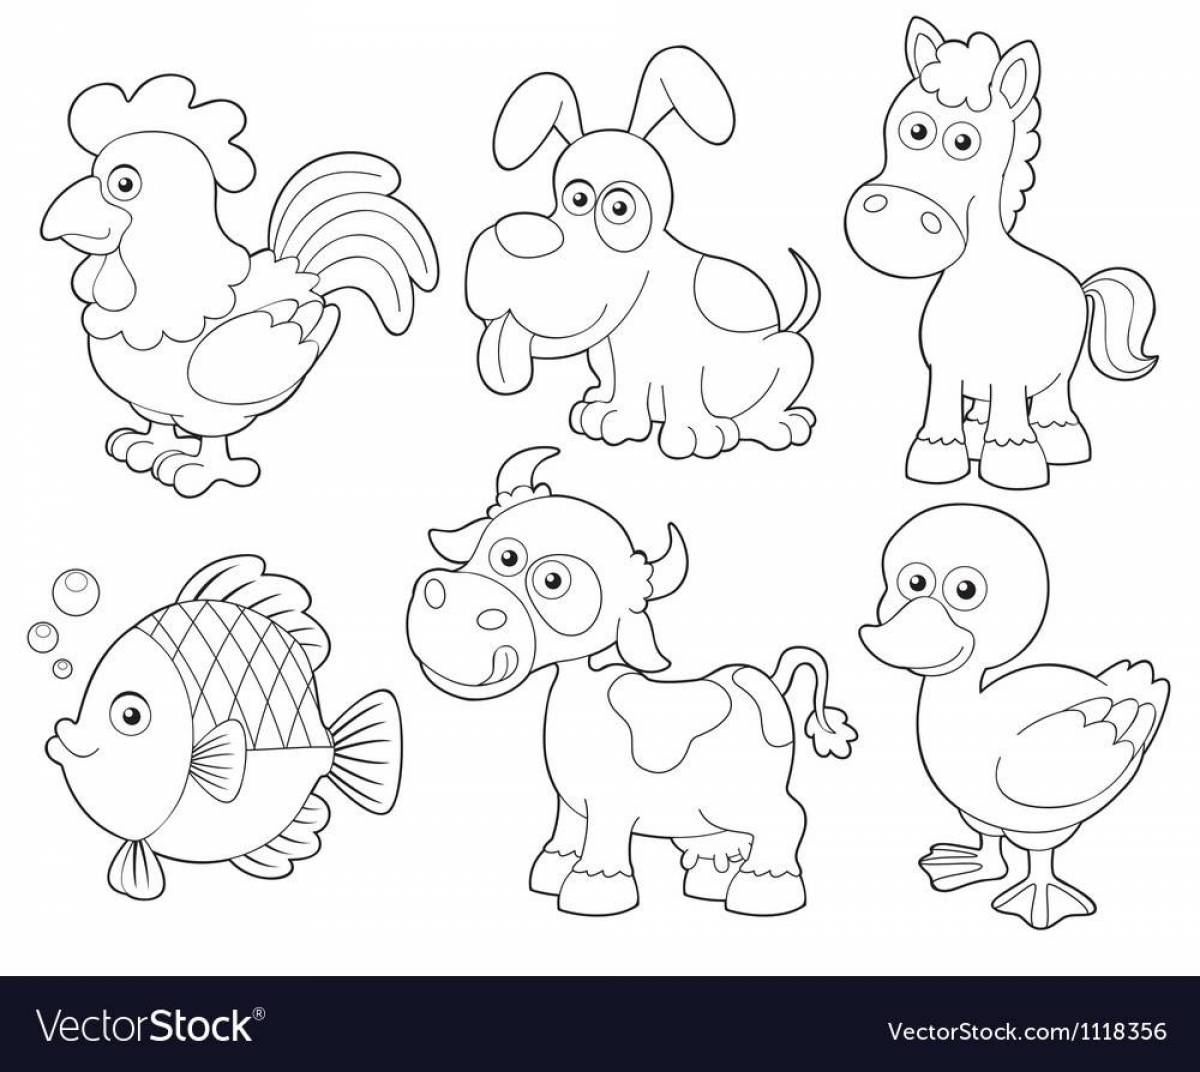 Cute animal coloring pages for 4-5 year olds